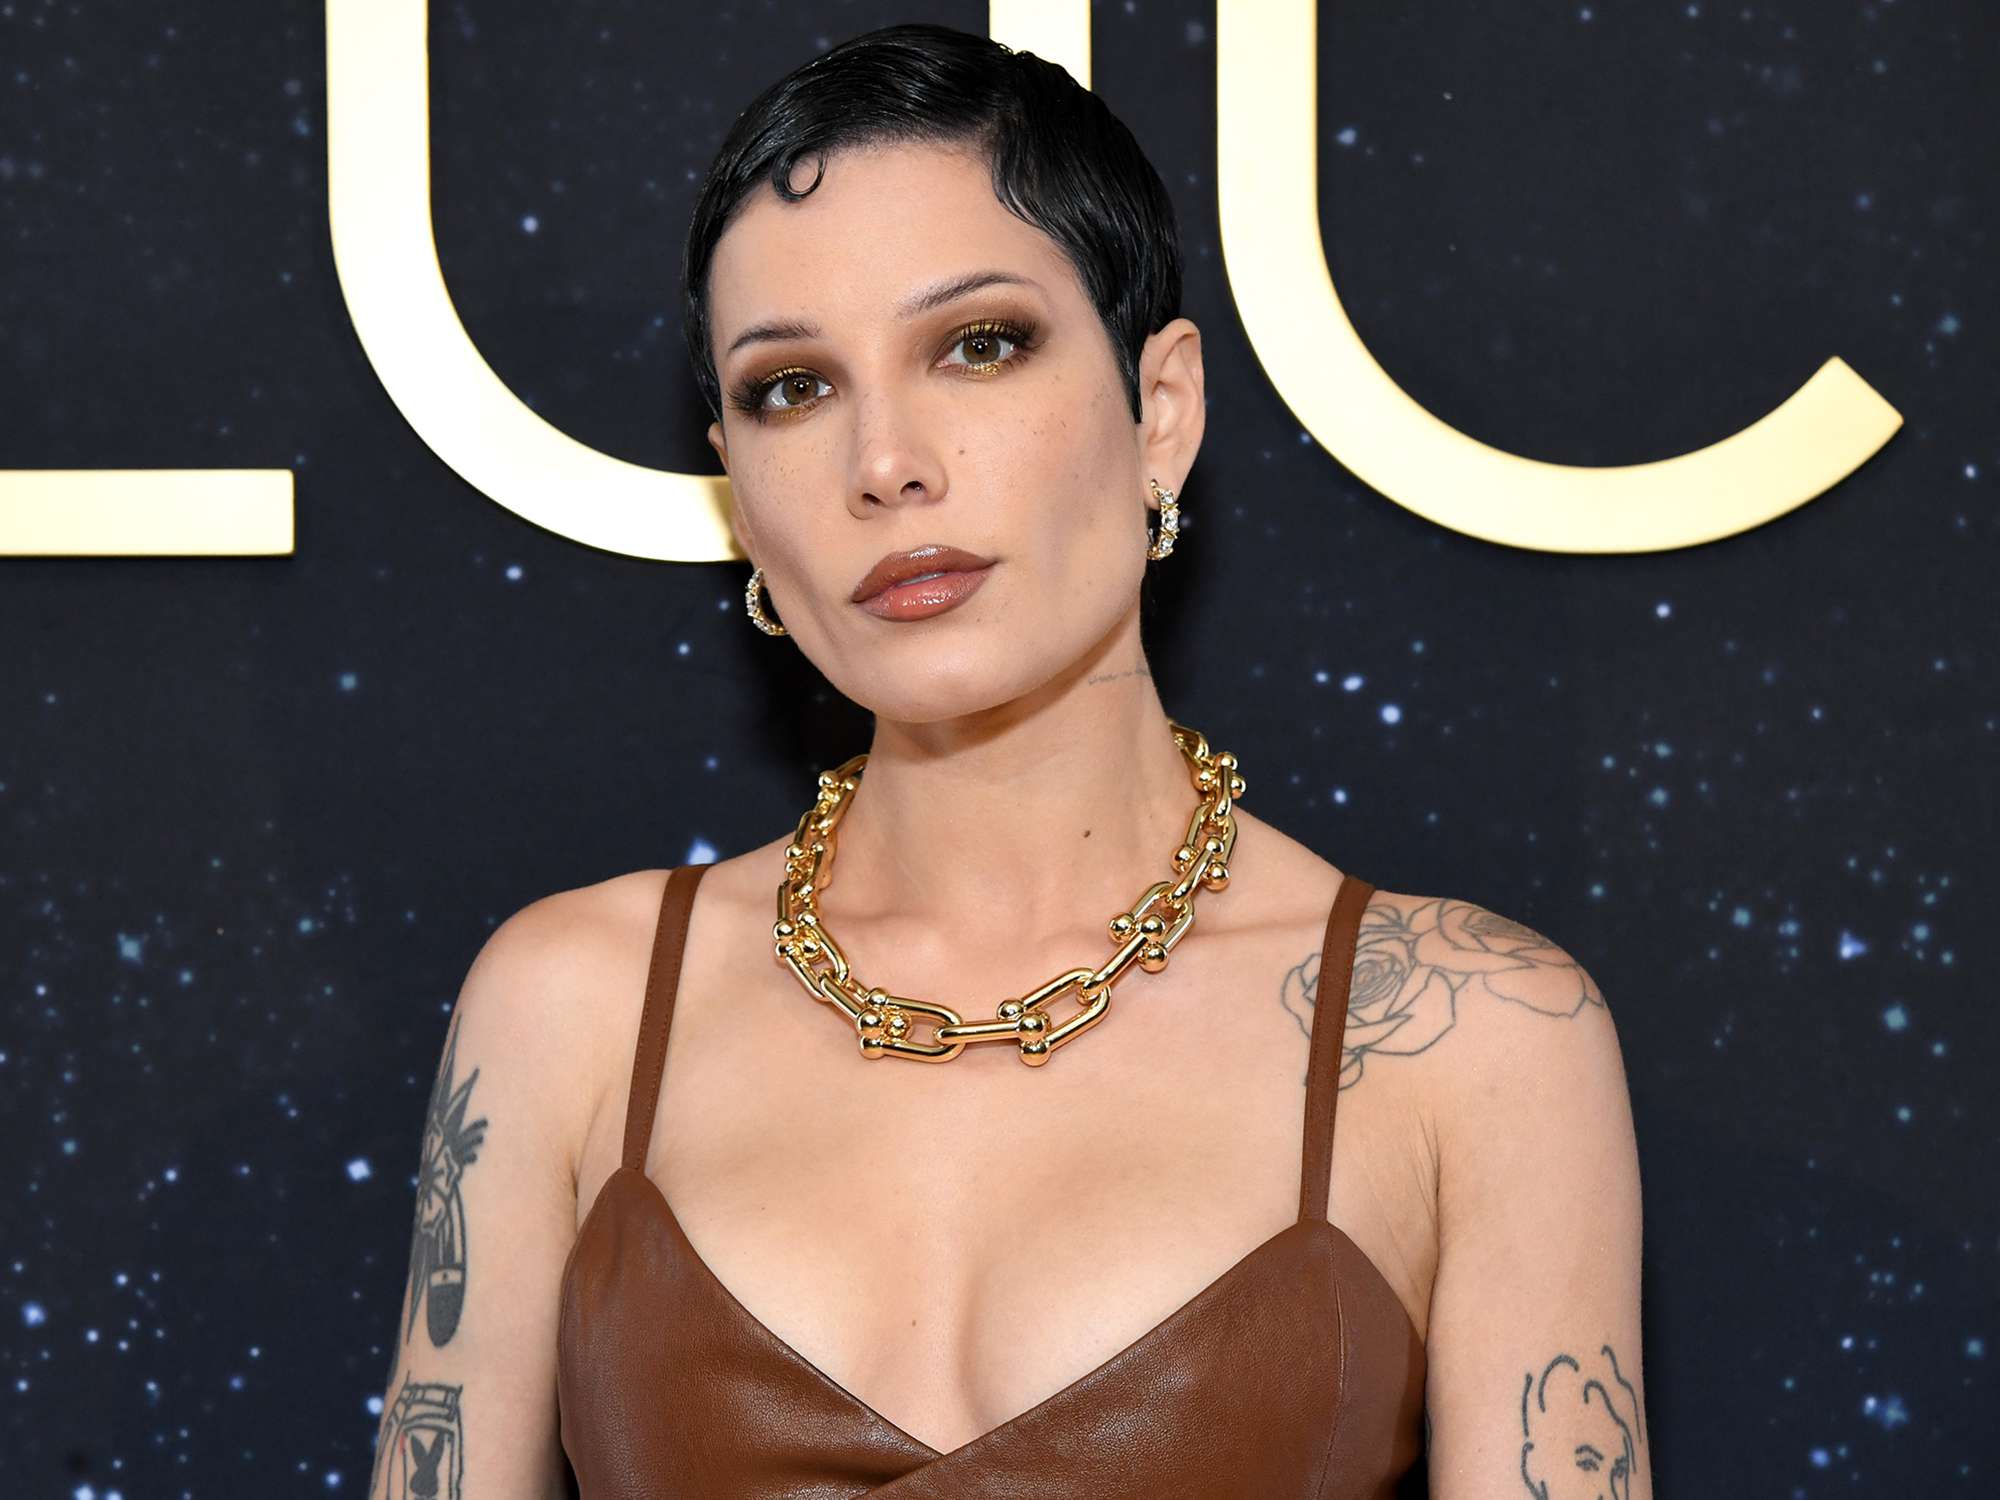 Halsey, 29, Diagnosed with Lupus and Another Rare Disorder, Says She's 'Feeling Better' After 'Rocky Start'